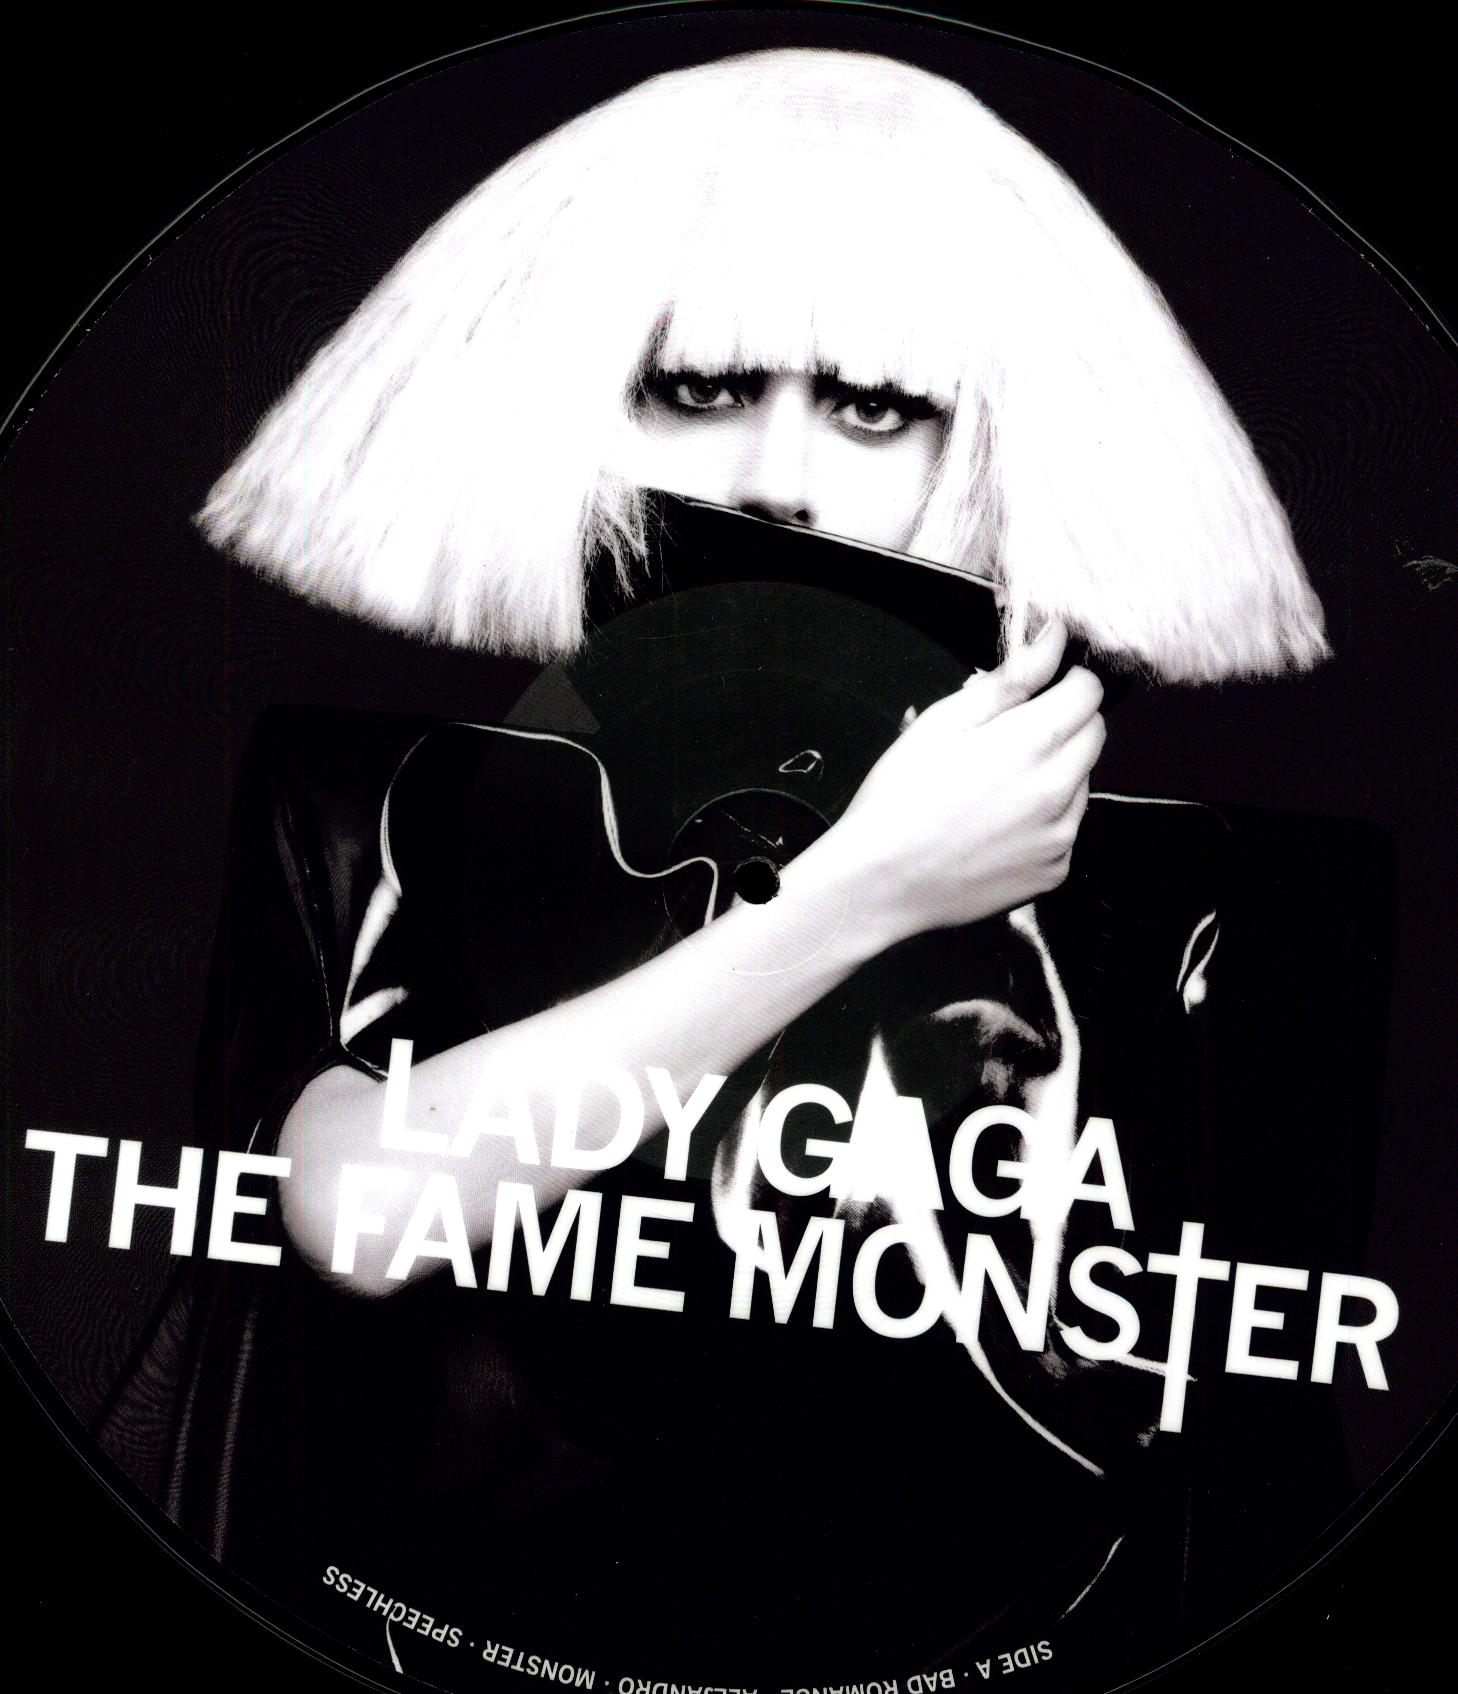 FAME MONSTER (PICTURE DISC) (PICT)